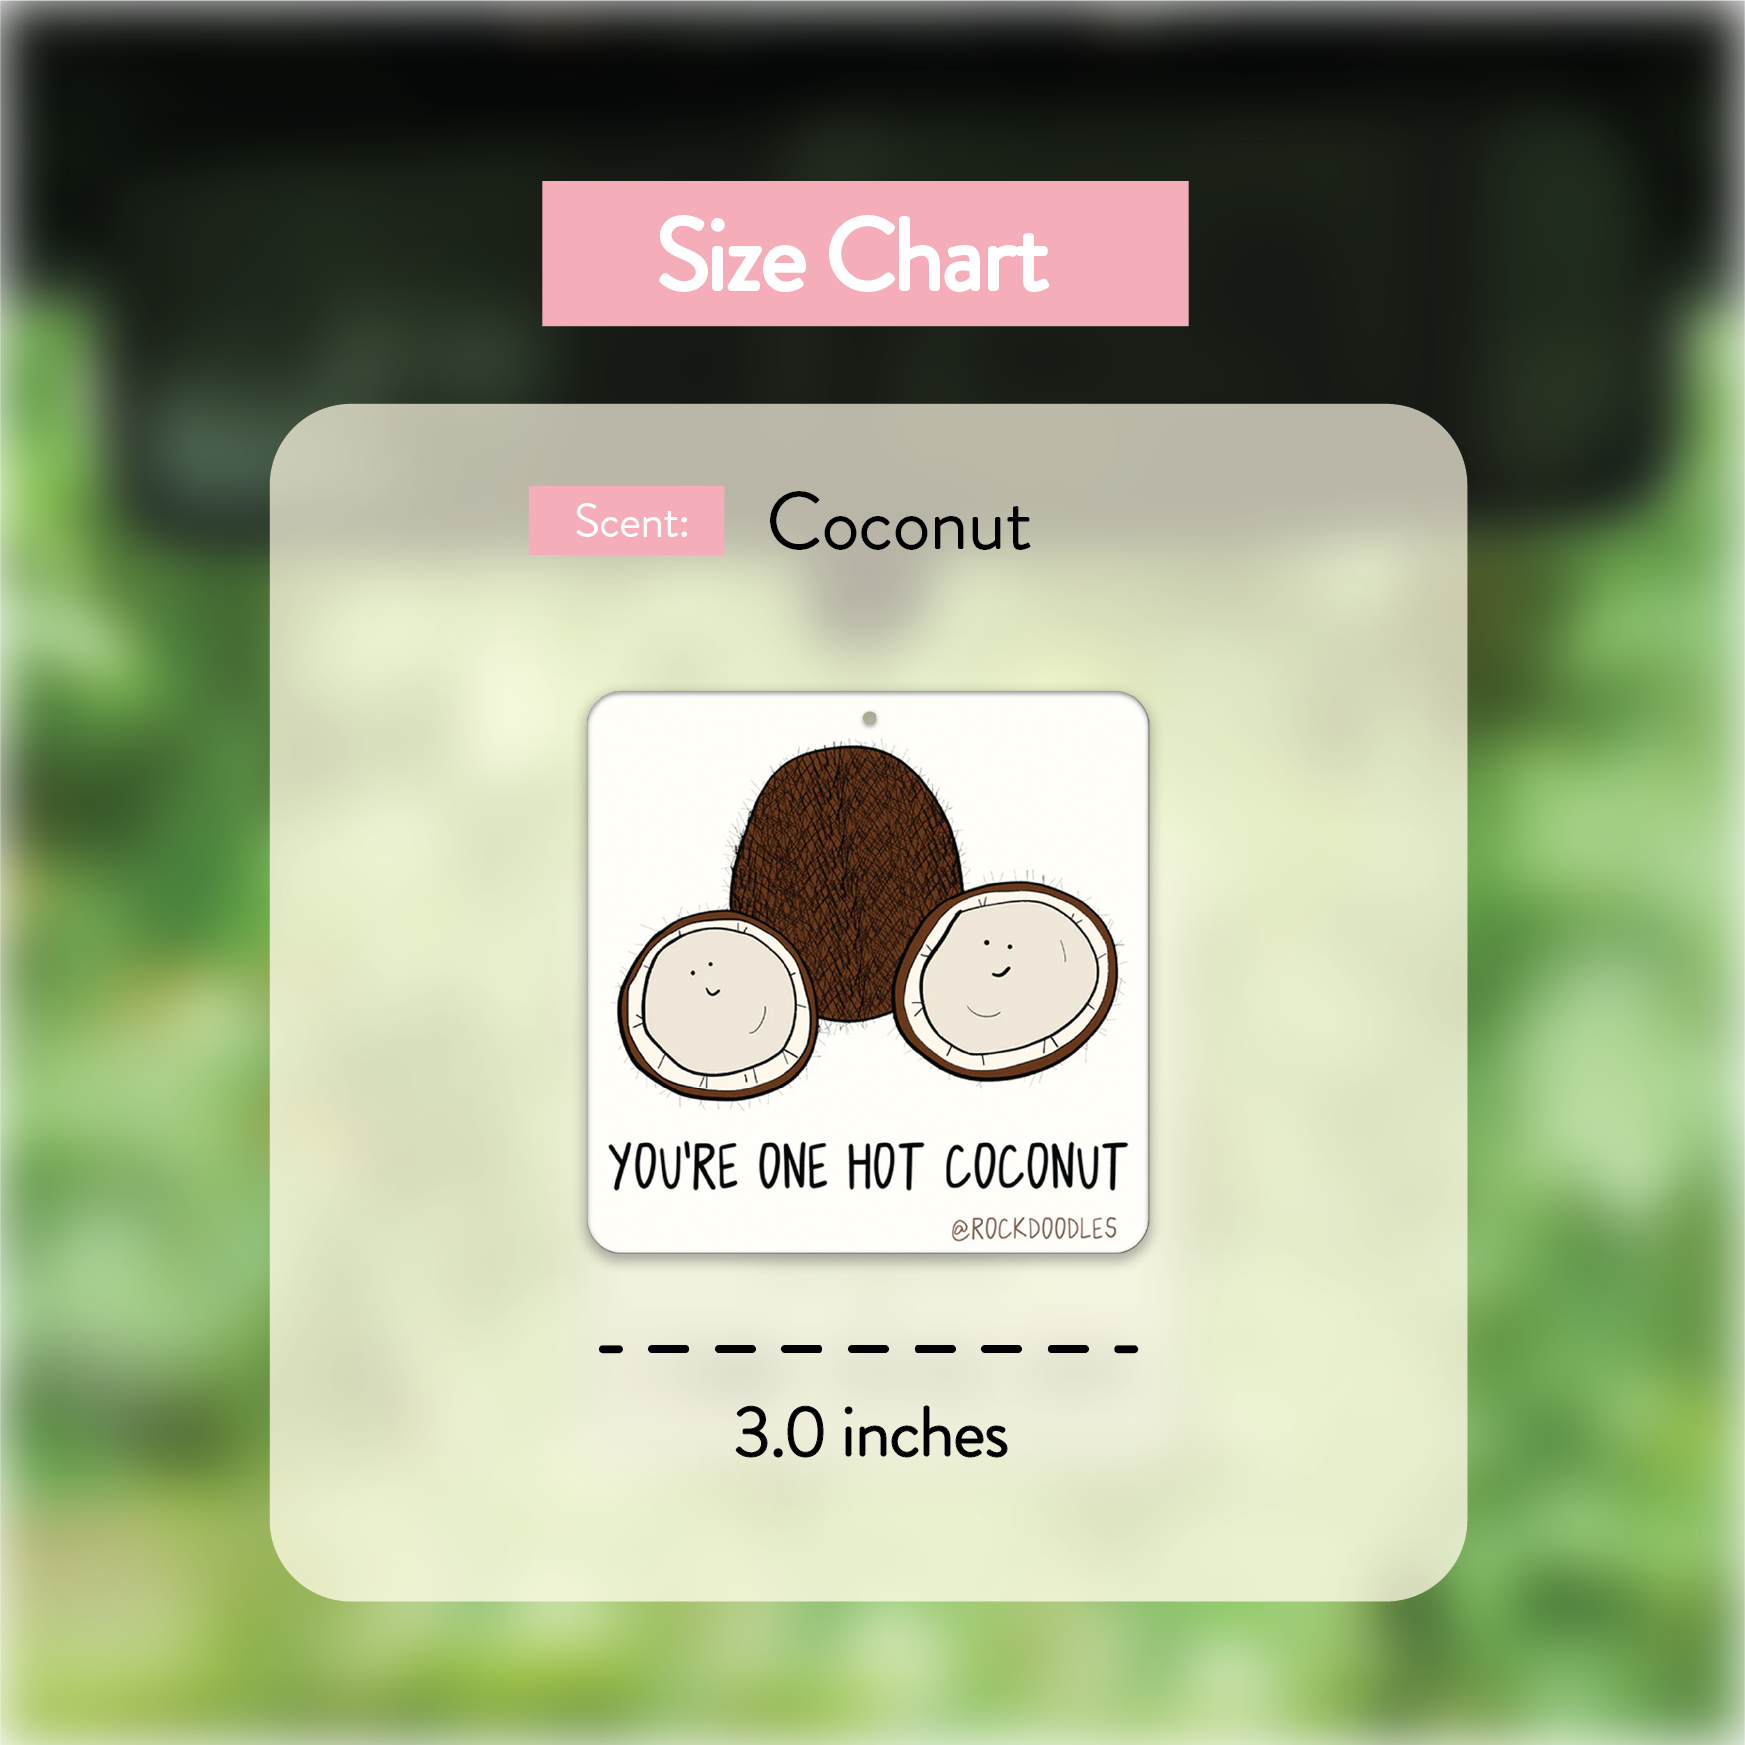 A One Hot Coconut (2-Pack) Punny Air Freshener - Coconut Scent by rockdoodles, featuring a sticker that says you're the hot coconut.